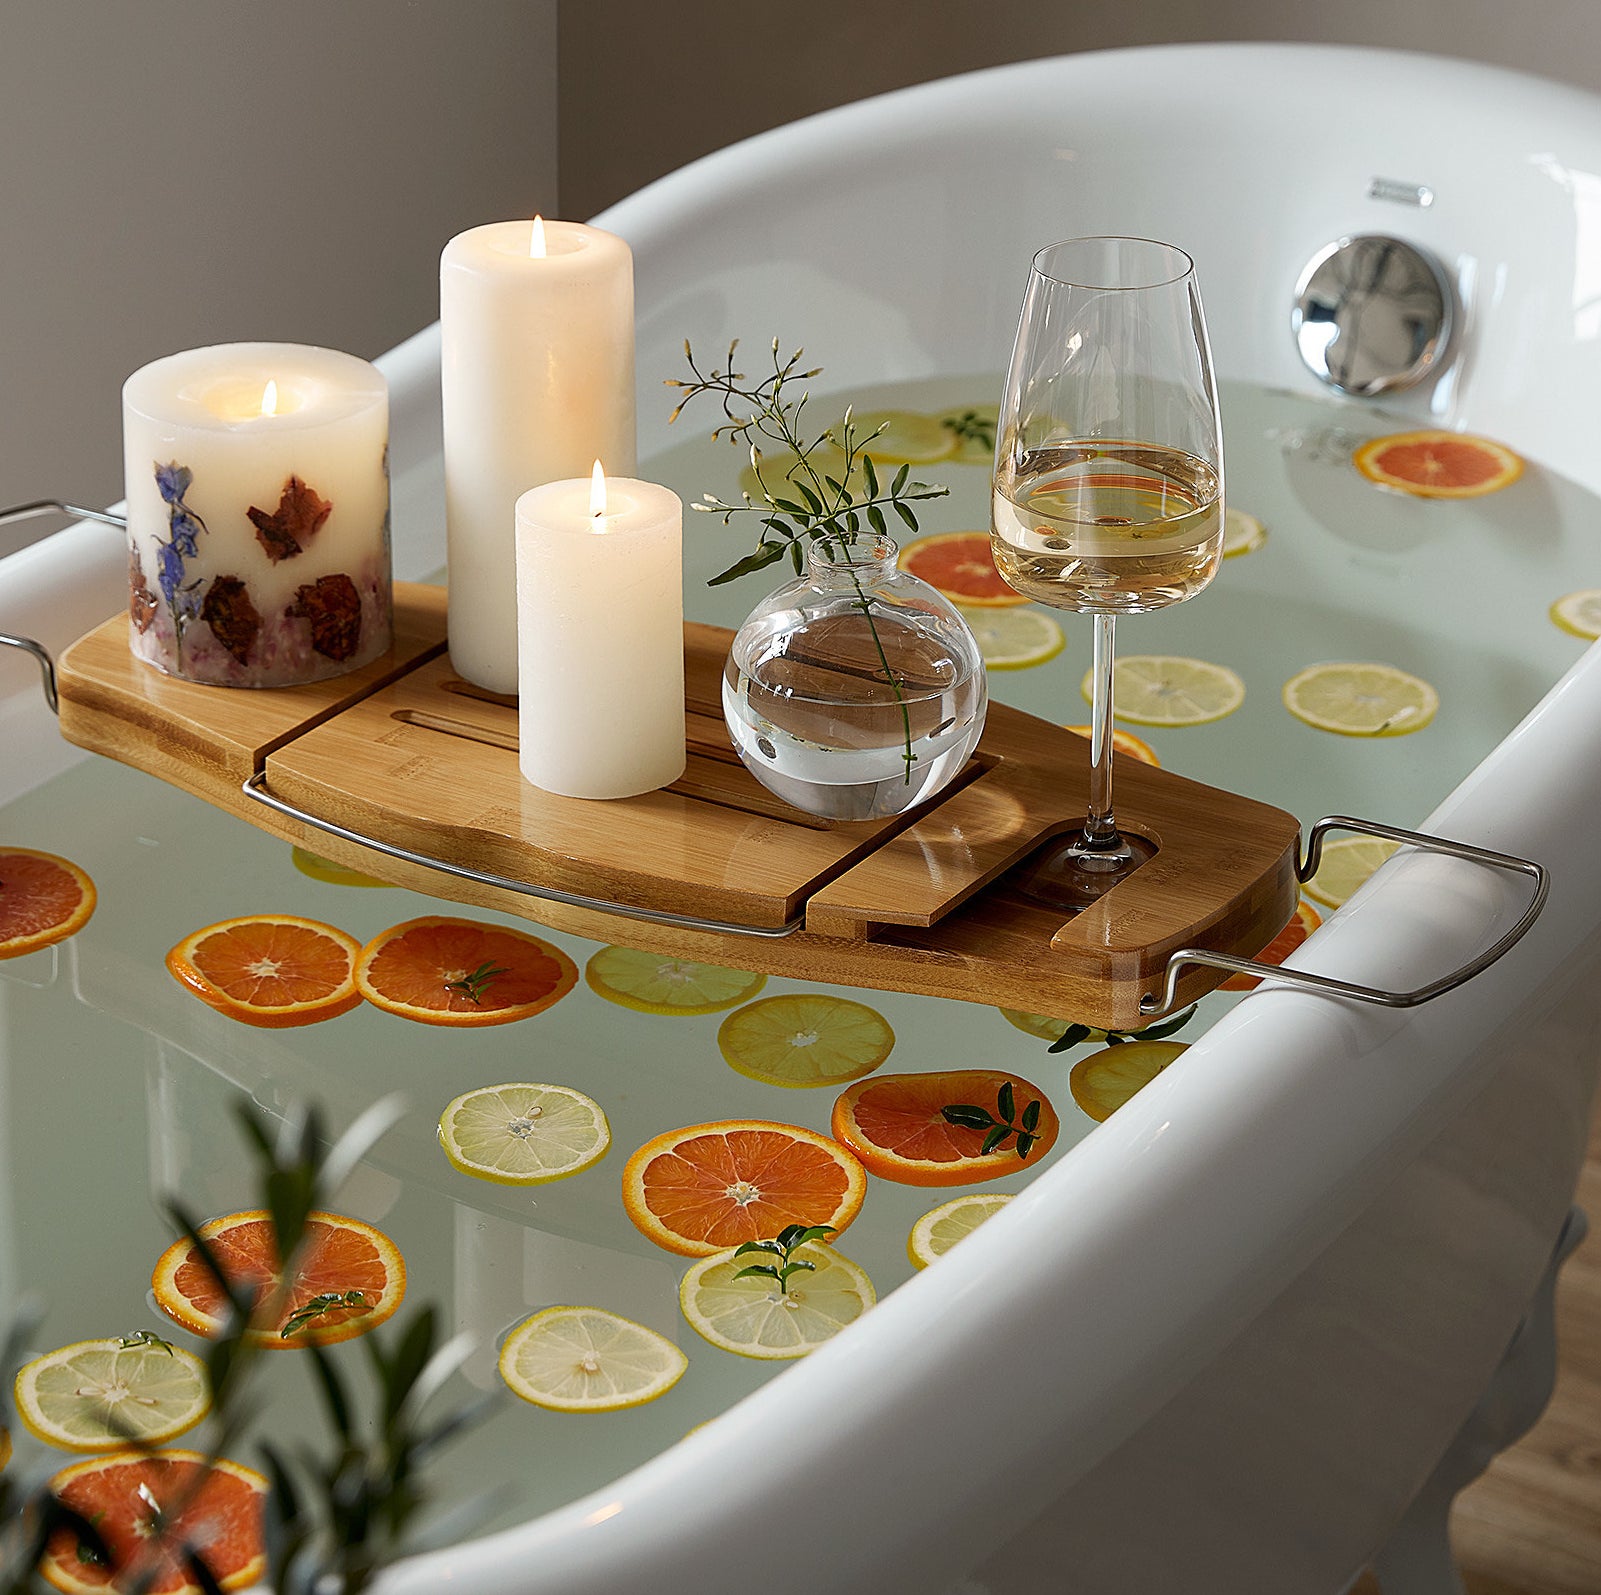 a tub filled with citrus slices with the tub tray on top holding candles and wine